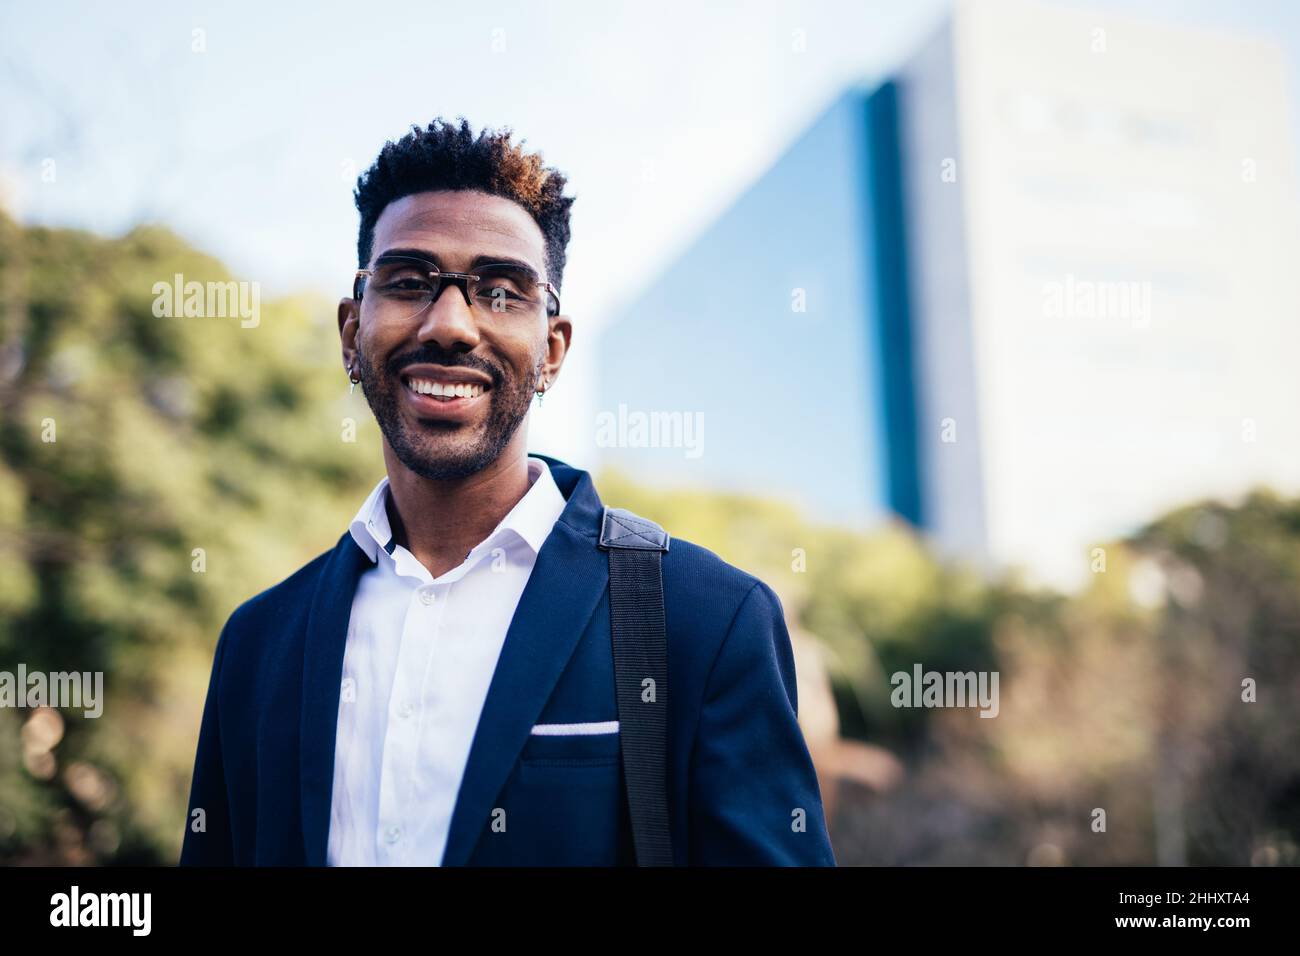 Portrait of young black male worker looking at camera on the street Stock Photo